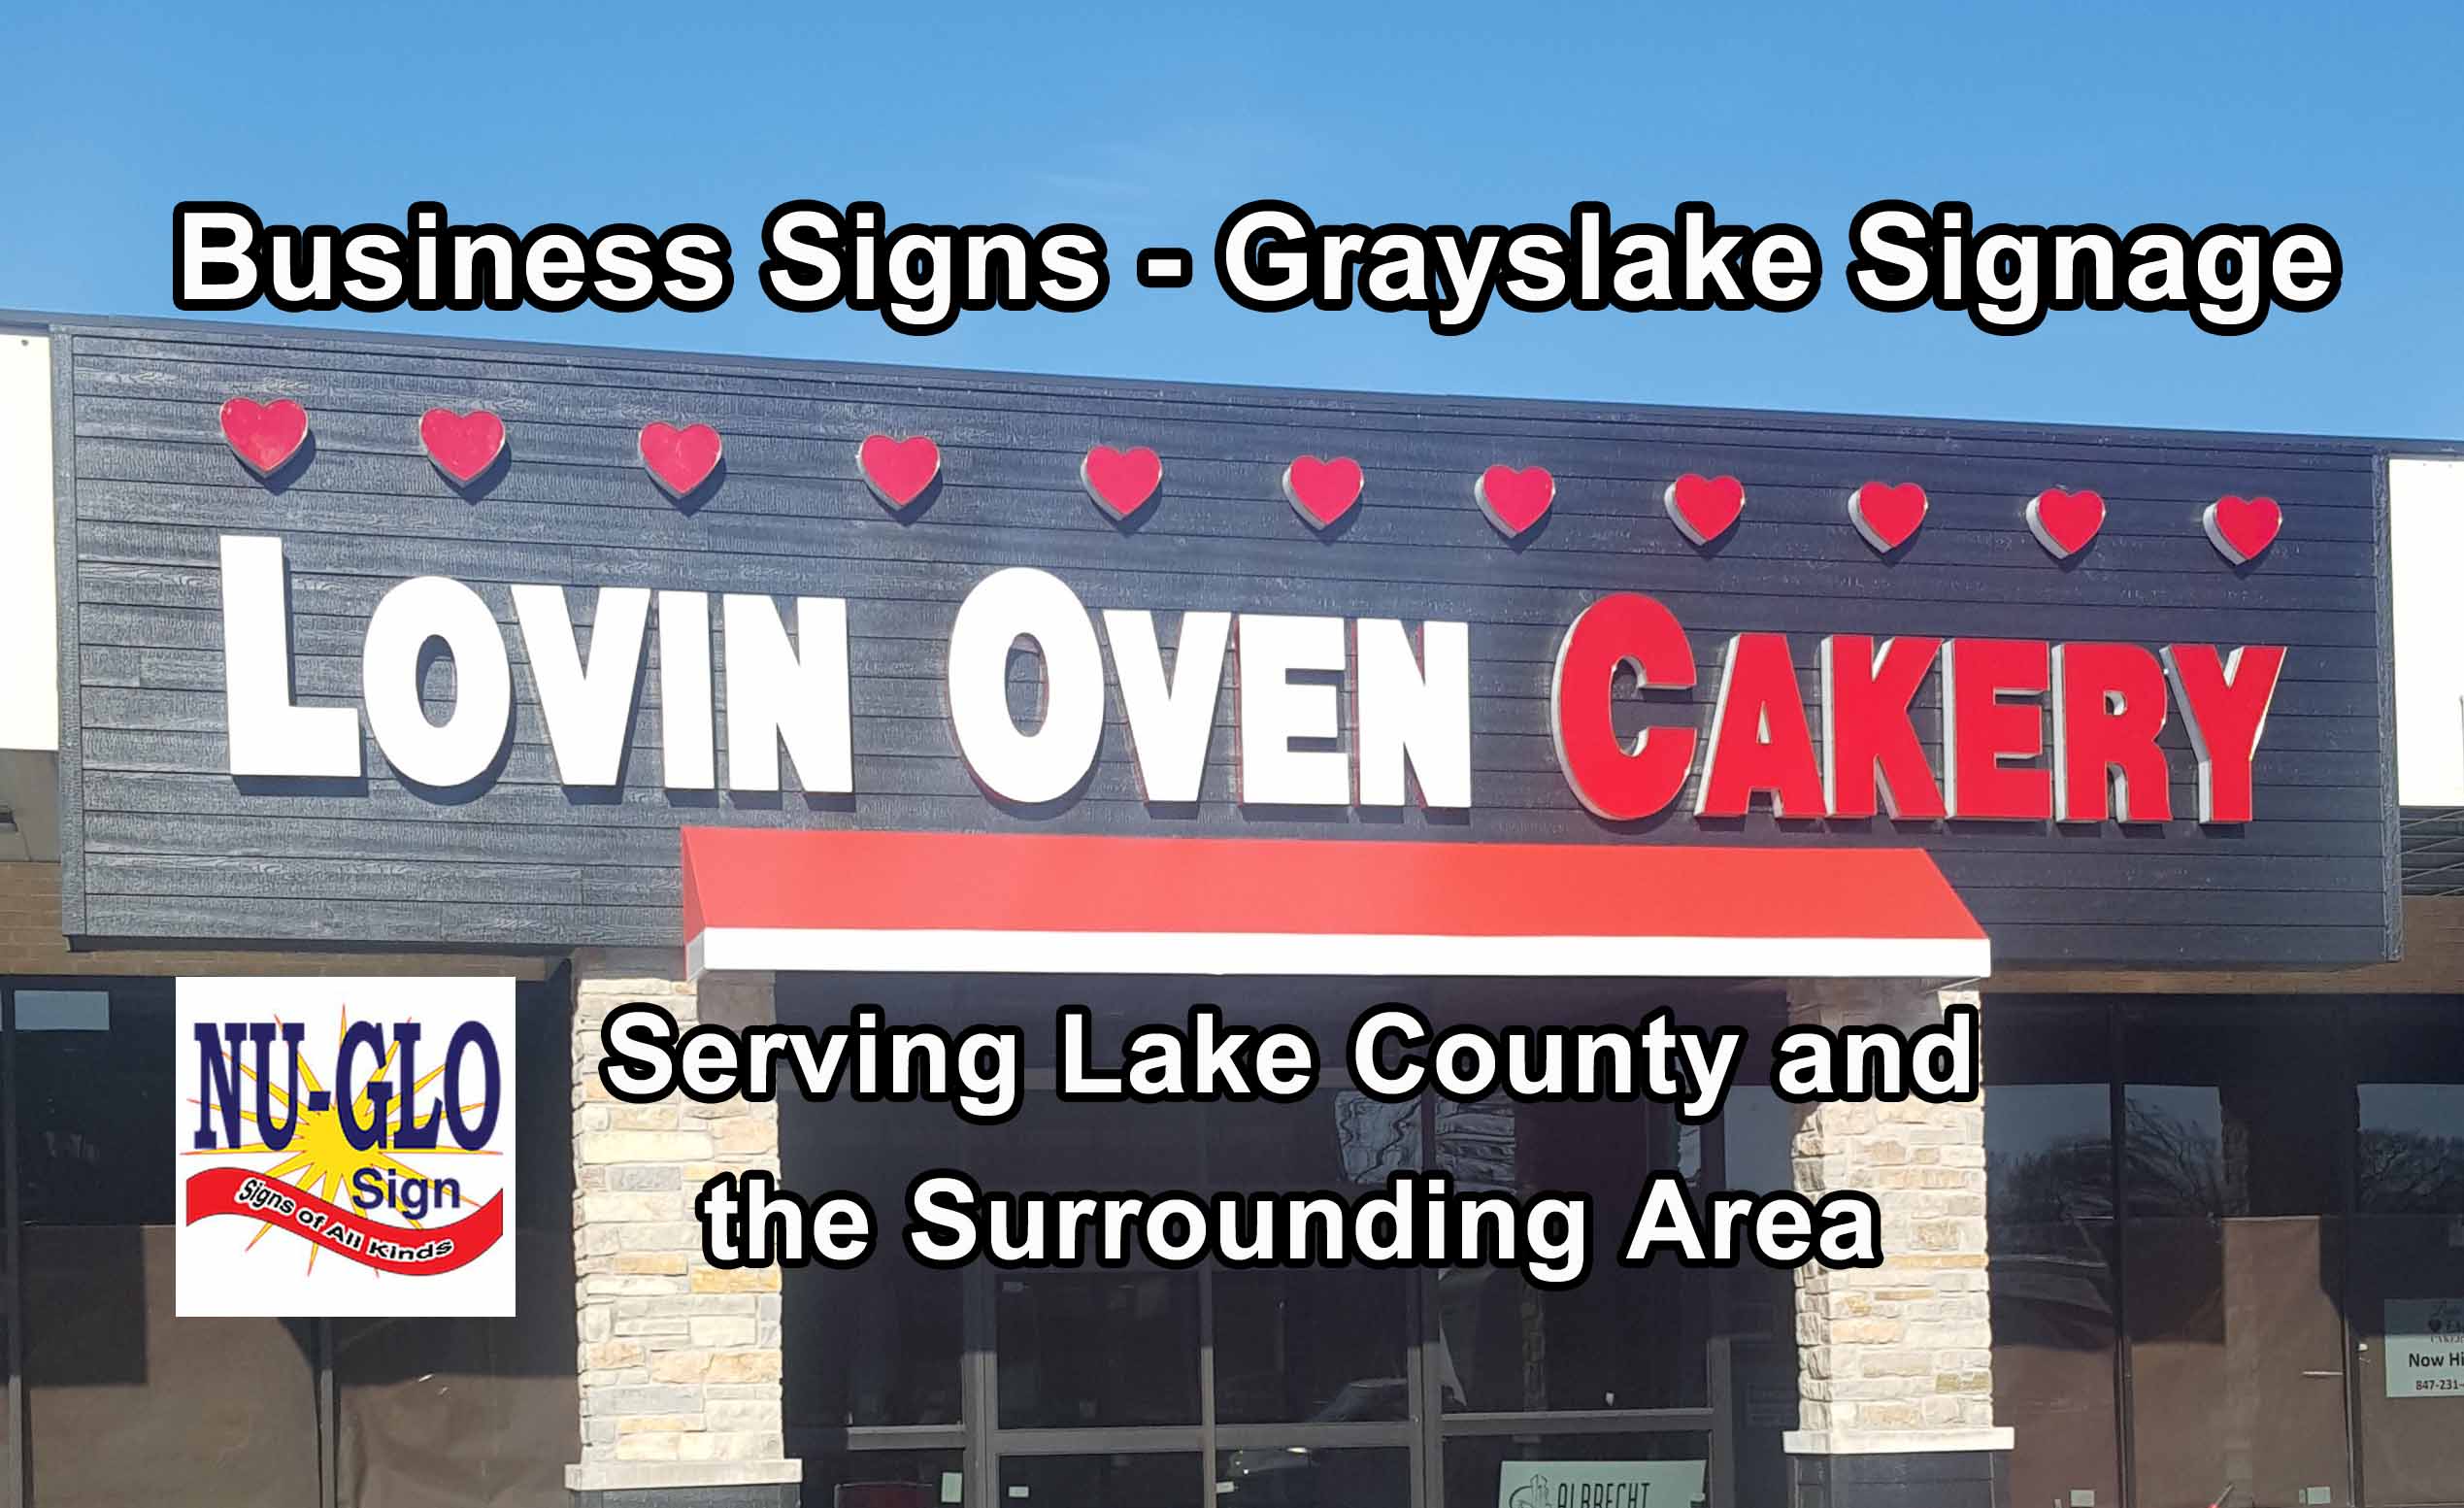 Business Signs - Grayslake Signage